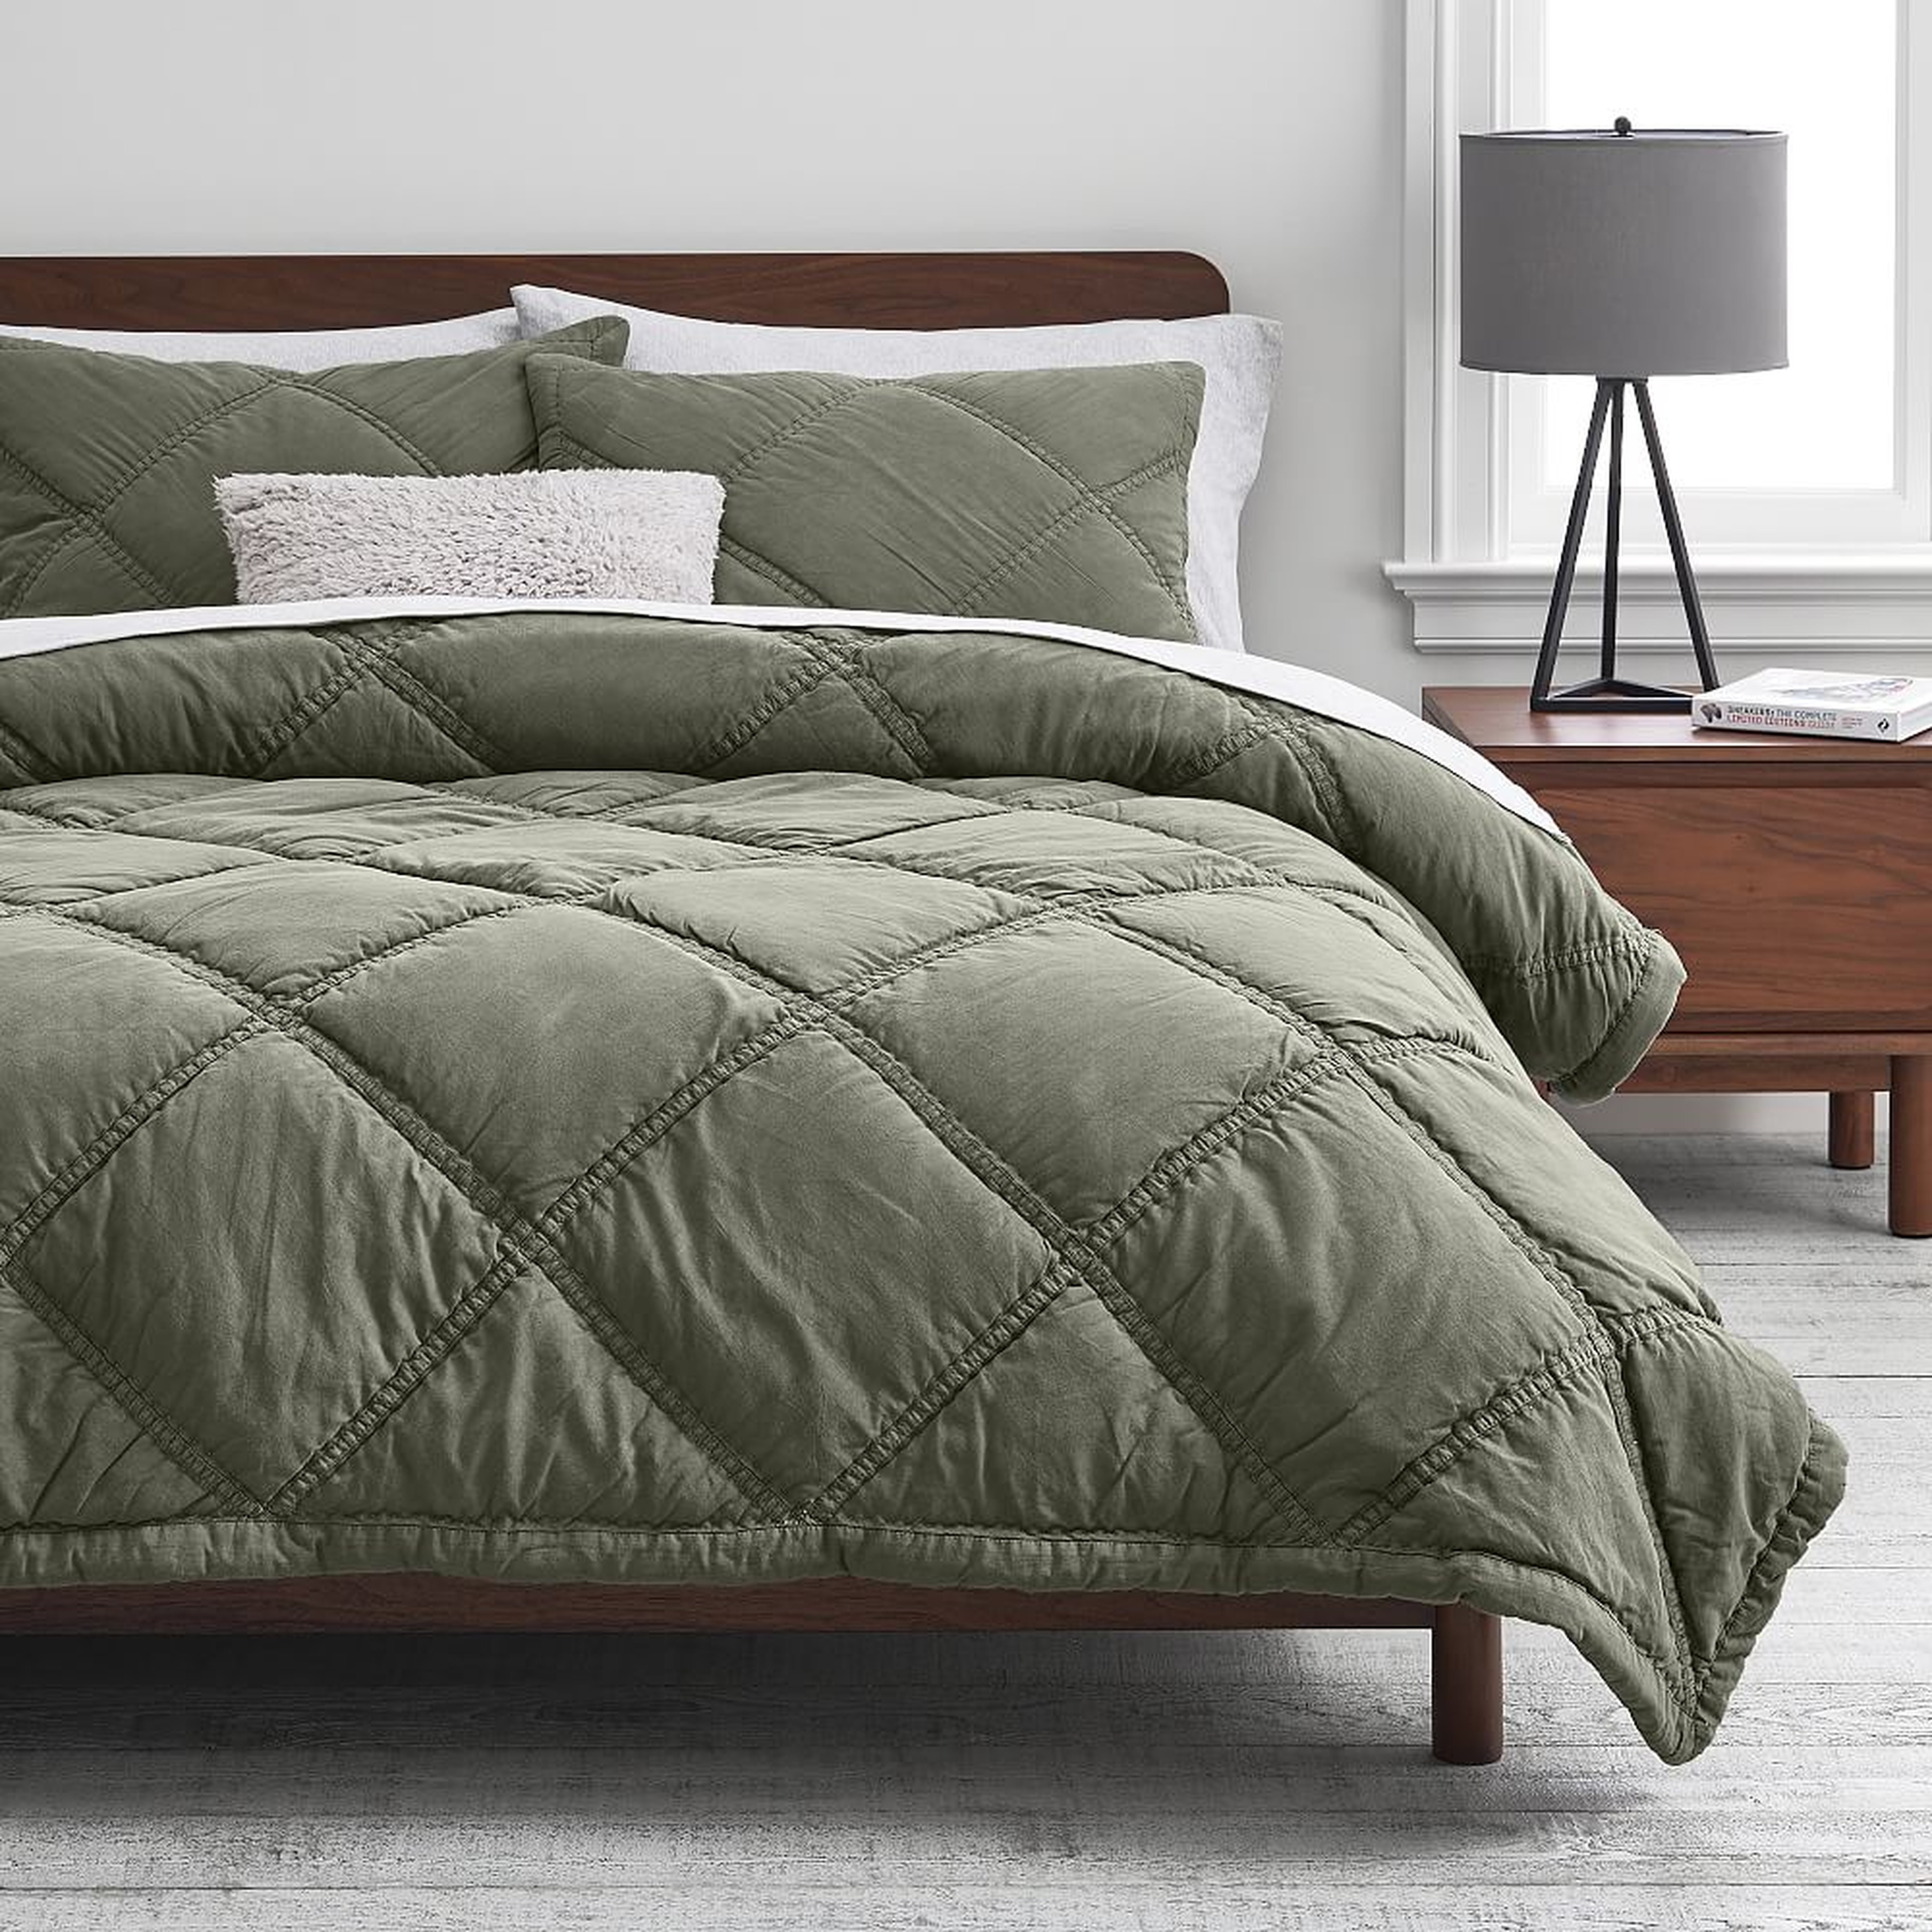 Washed Rapids Quilt, Full/Queen, Washed Olive - Pottery Barn Teen